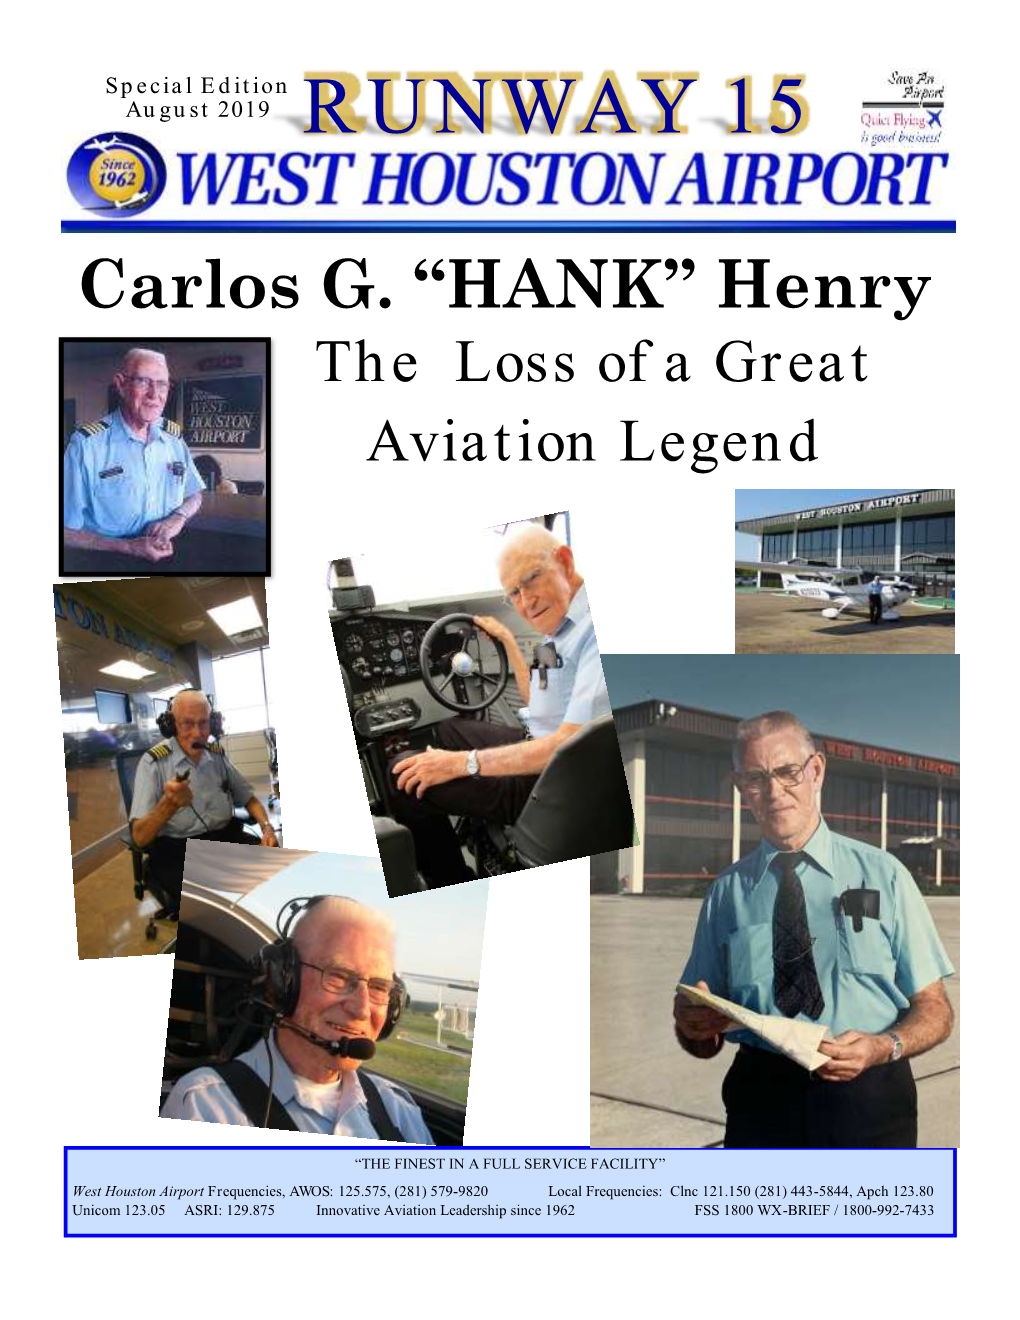 HANK” Henry the Loss of a Great Aviation Legend